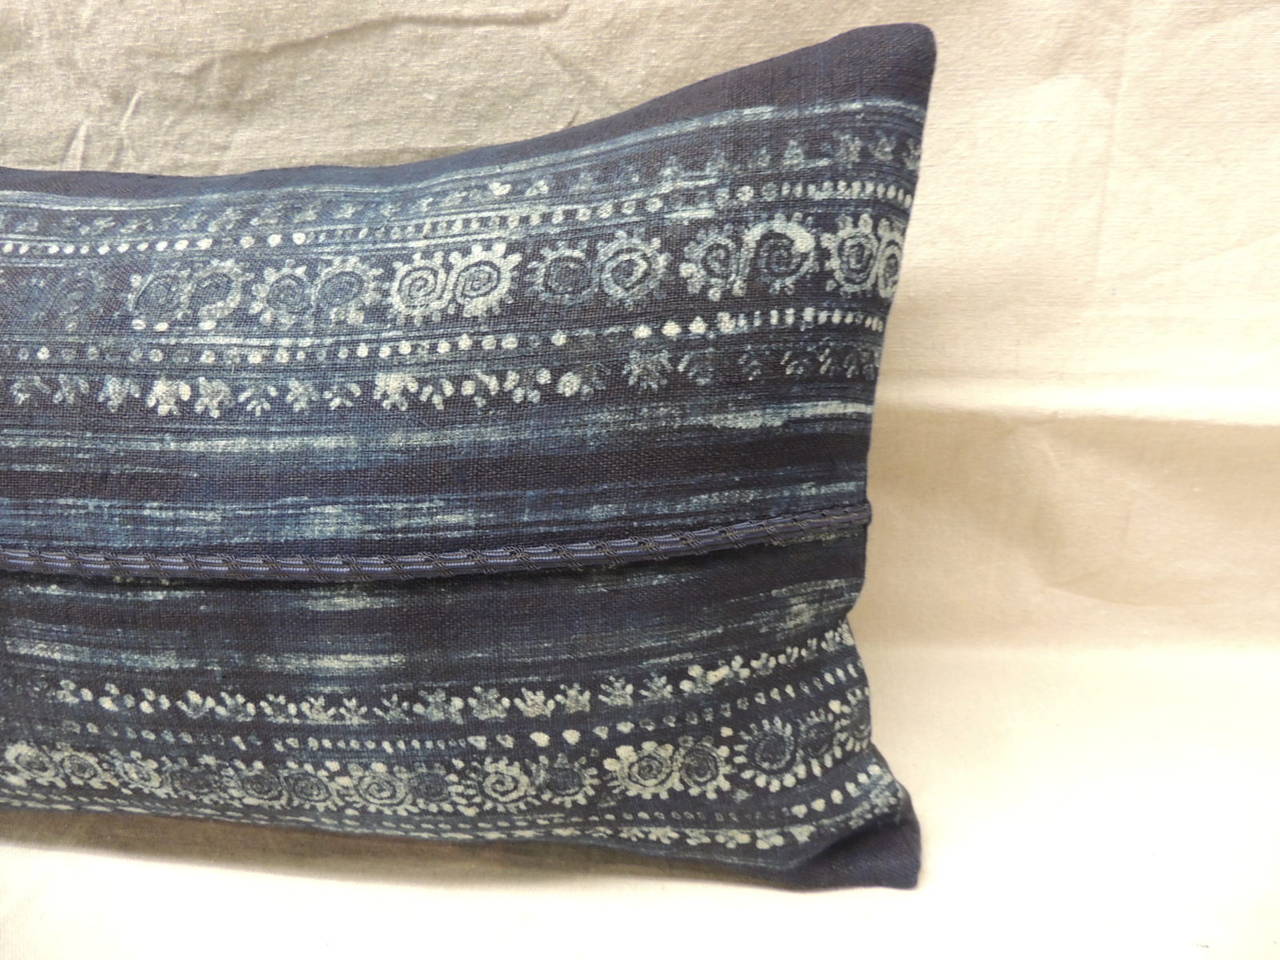 Blue and white hand-blocked batik bolster pillow with navy frame and linen backing, decorative braided detail on middle seam.